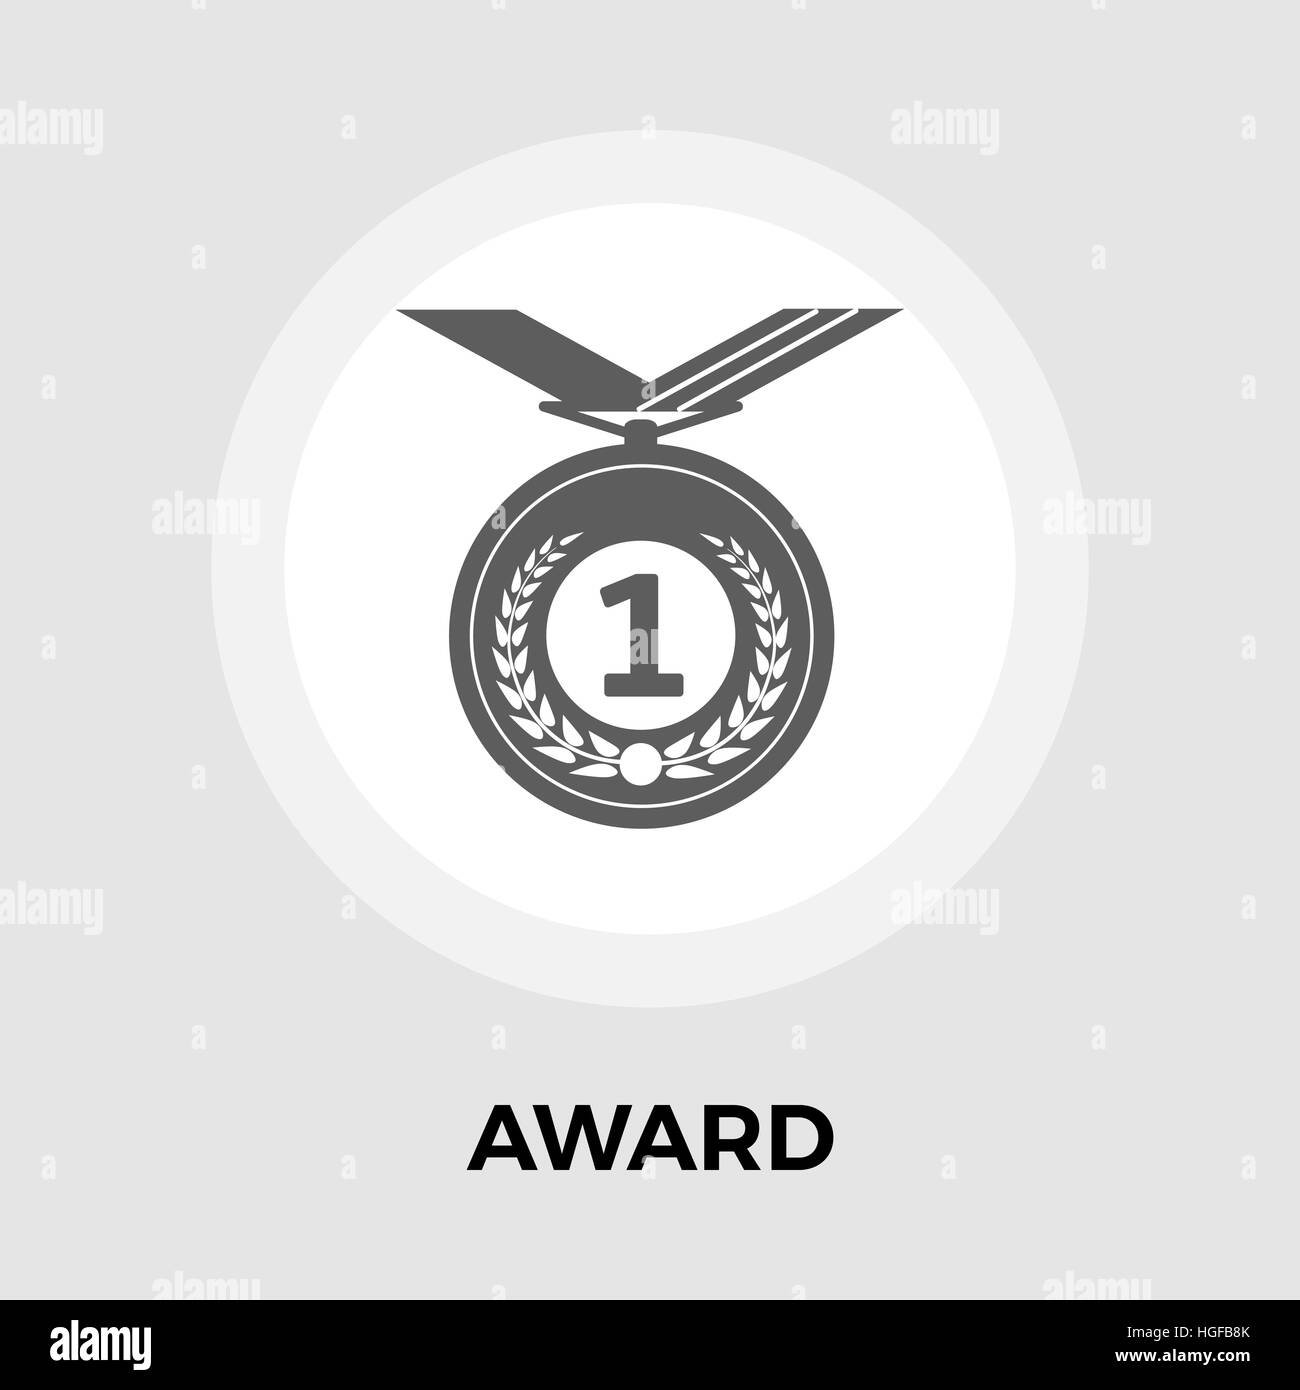 Award Icon Vector. Flat icon isolated on the white background. Editable EPS file. Vector illustration. Stock Vector